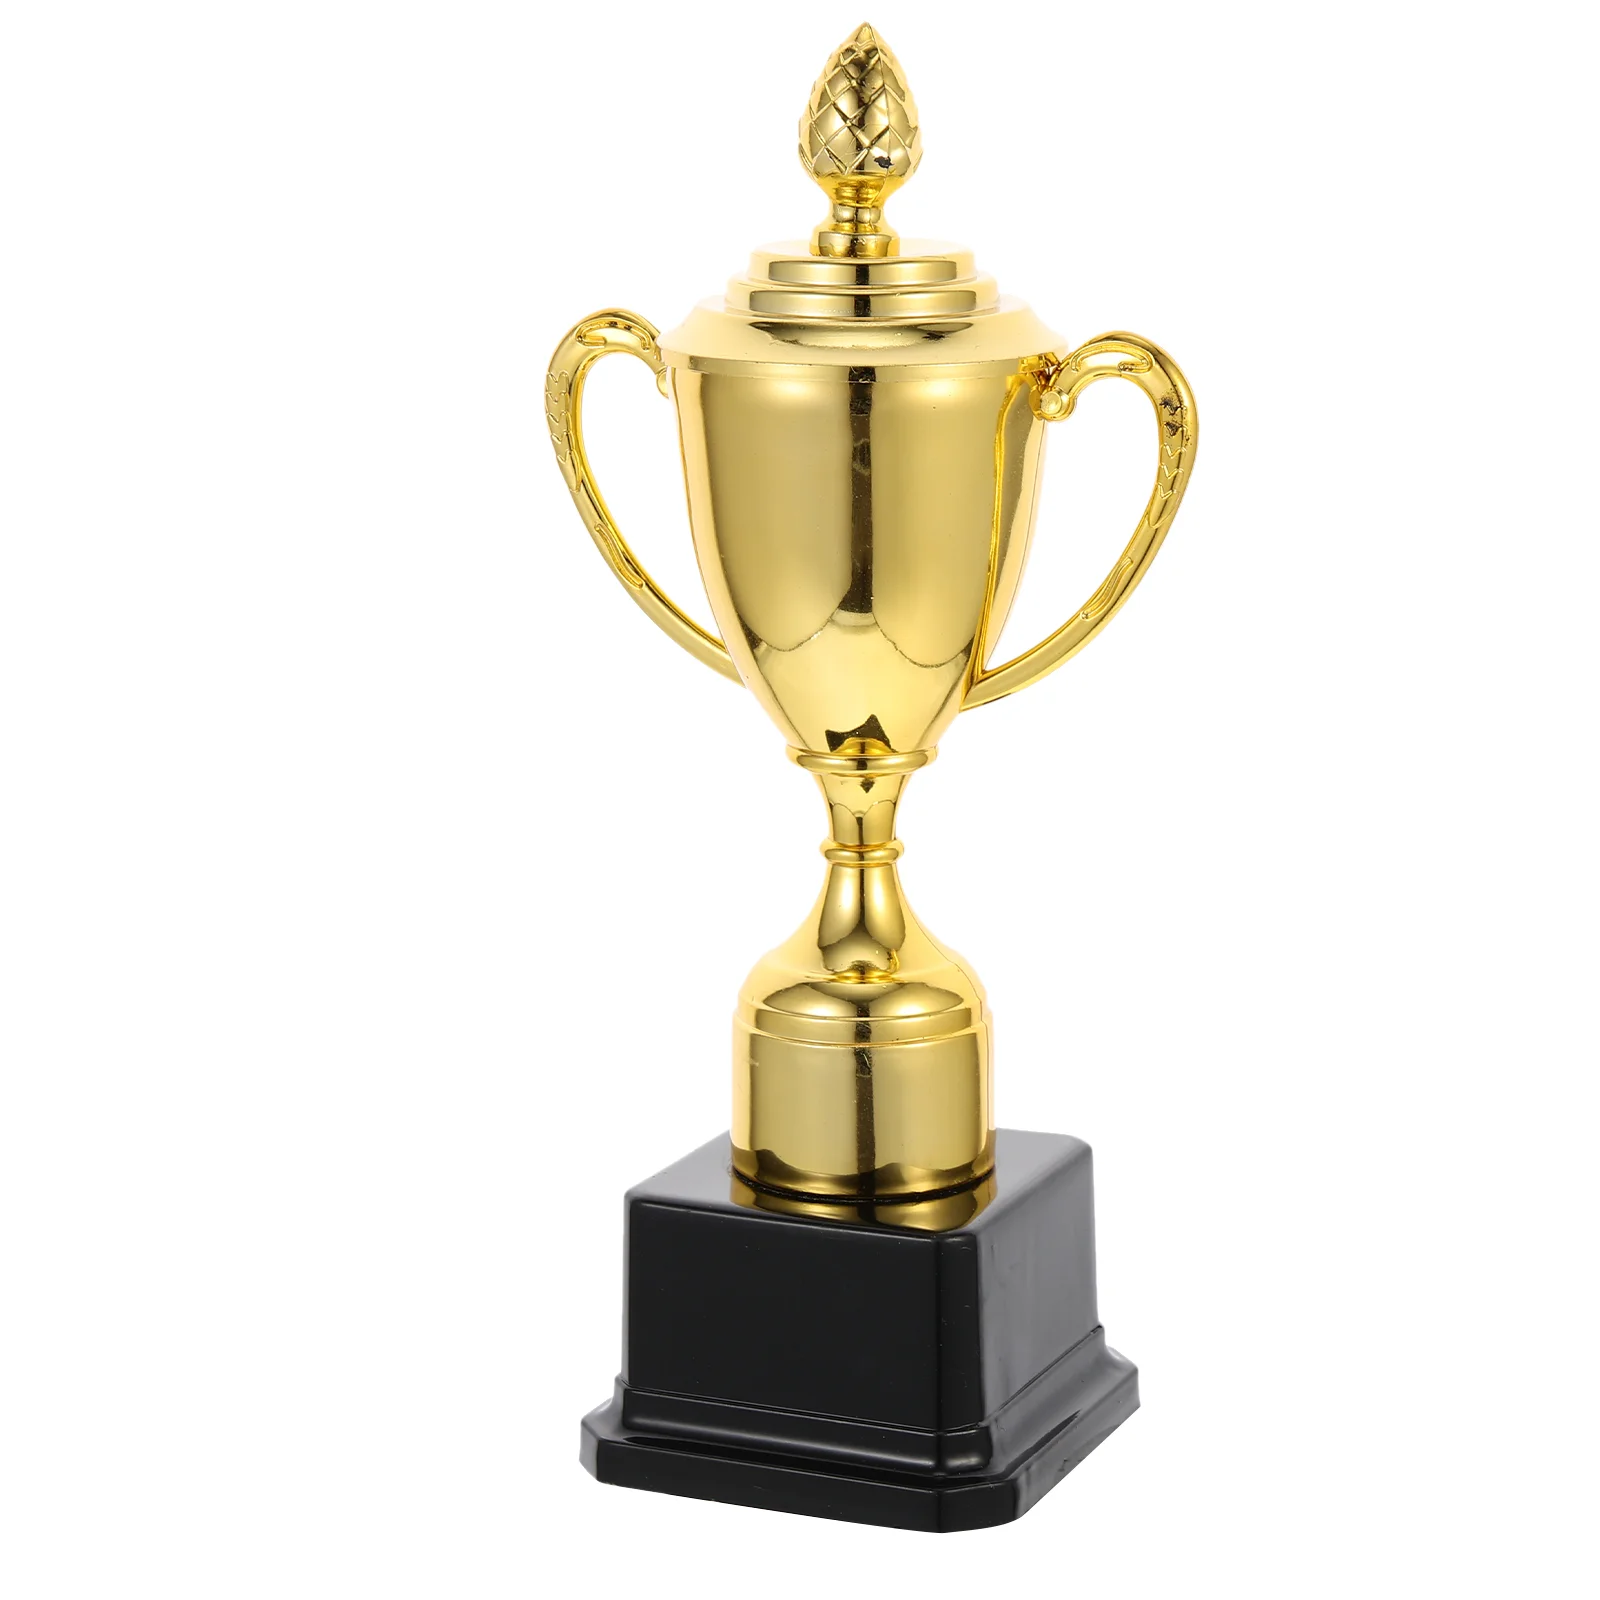 

Trophy Cup Award Trophies Gold Mini Awards Winner Kids Party Competition Prize Trophys Golden Cups Reward Favors Game Sports